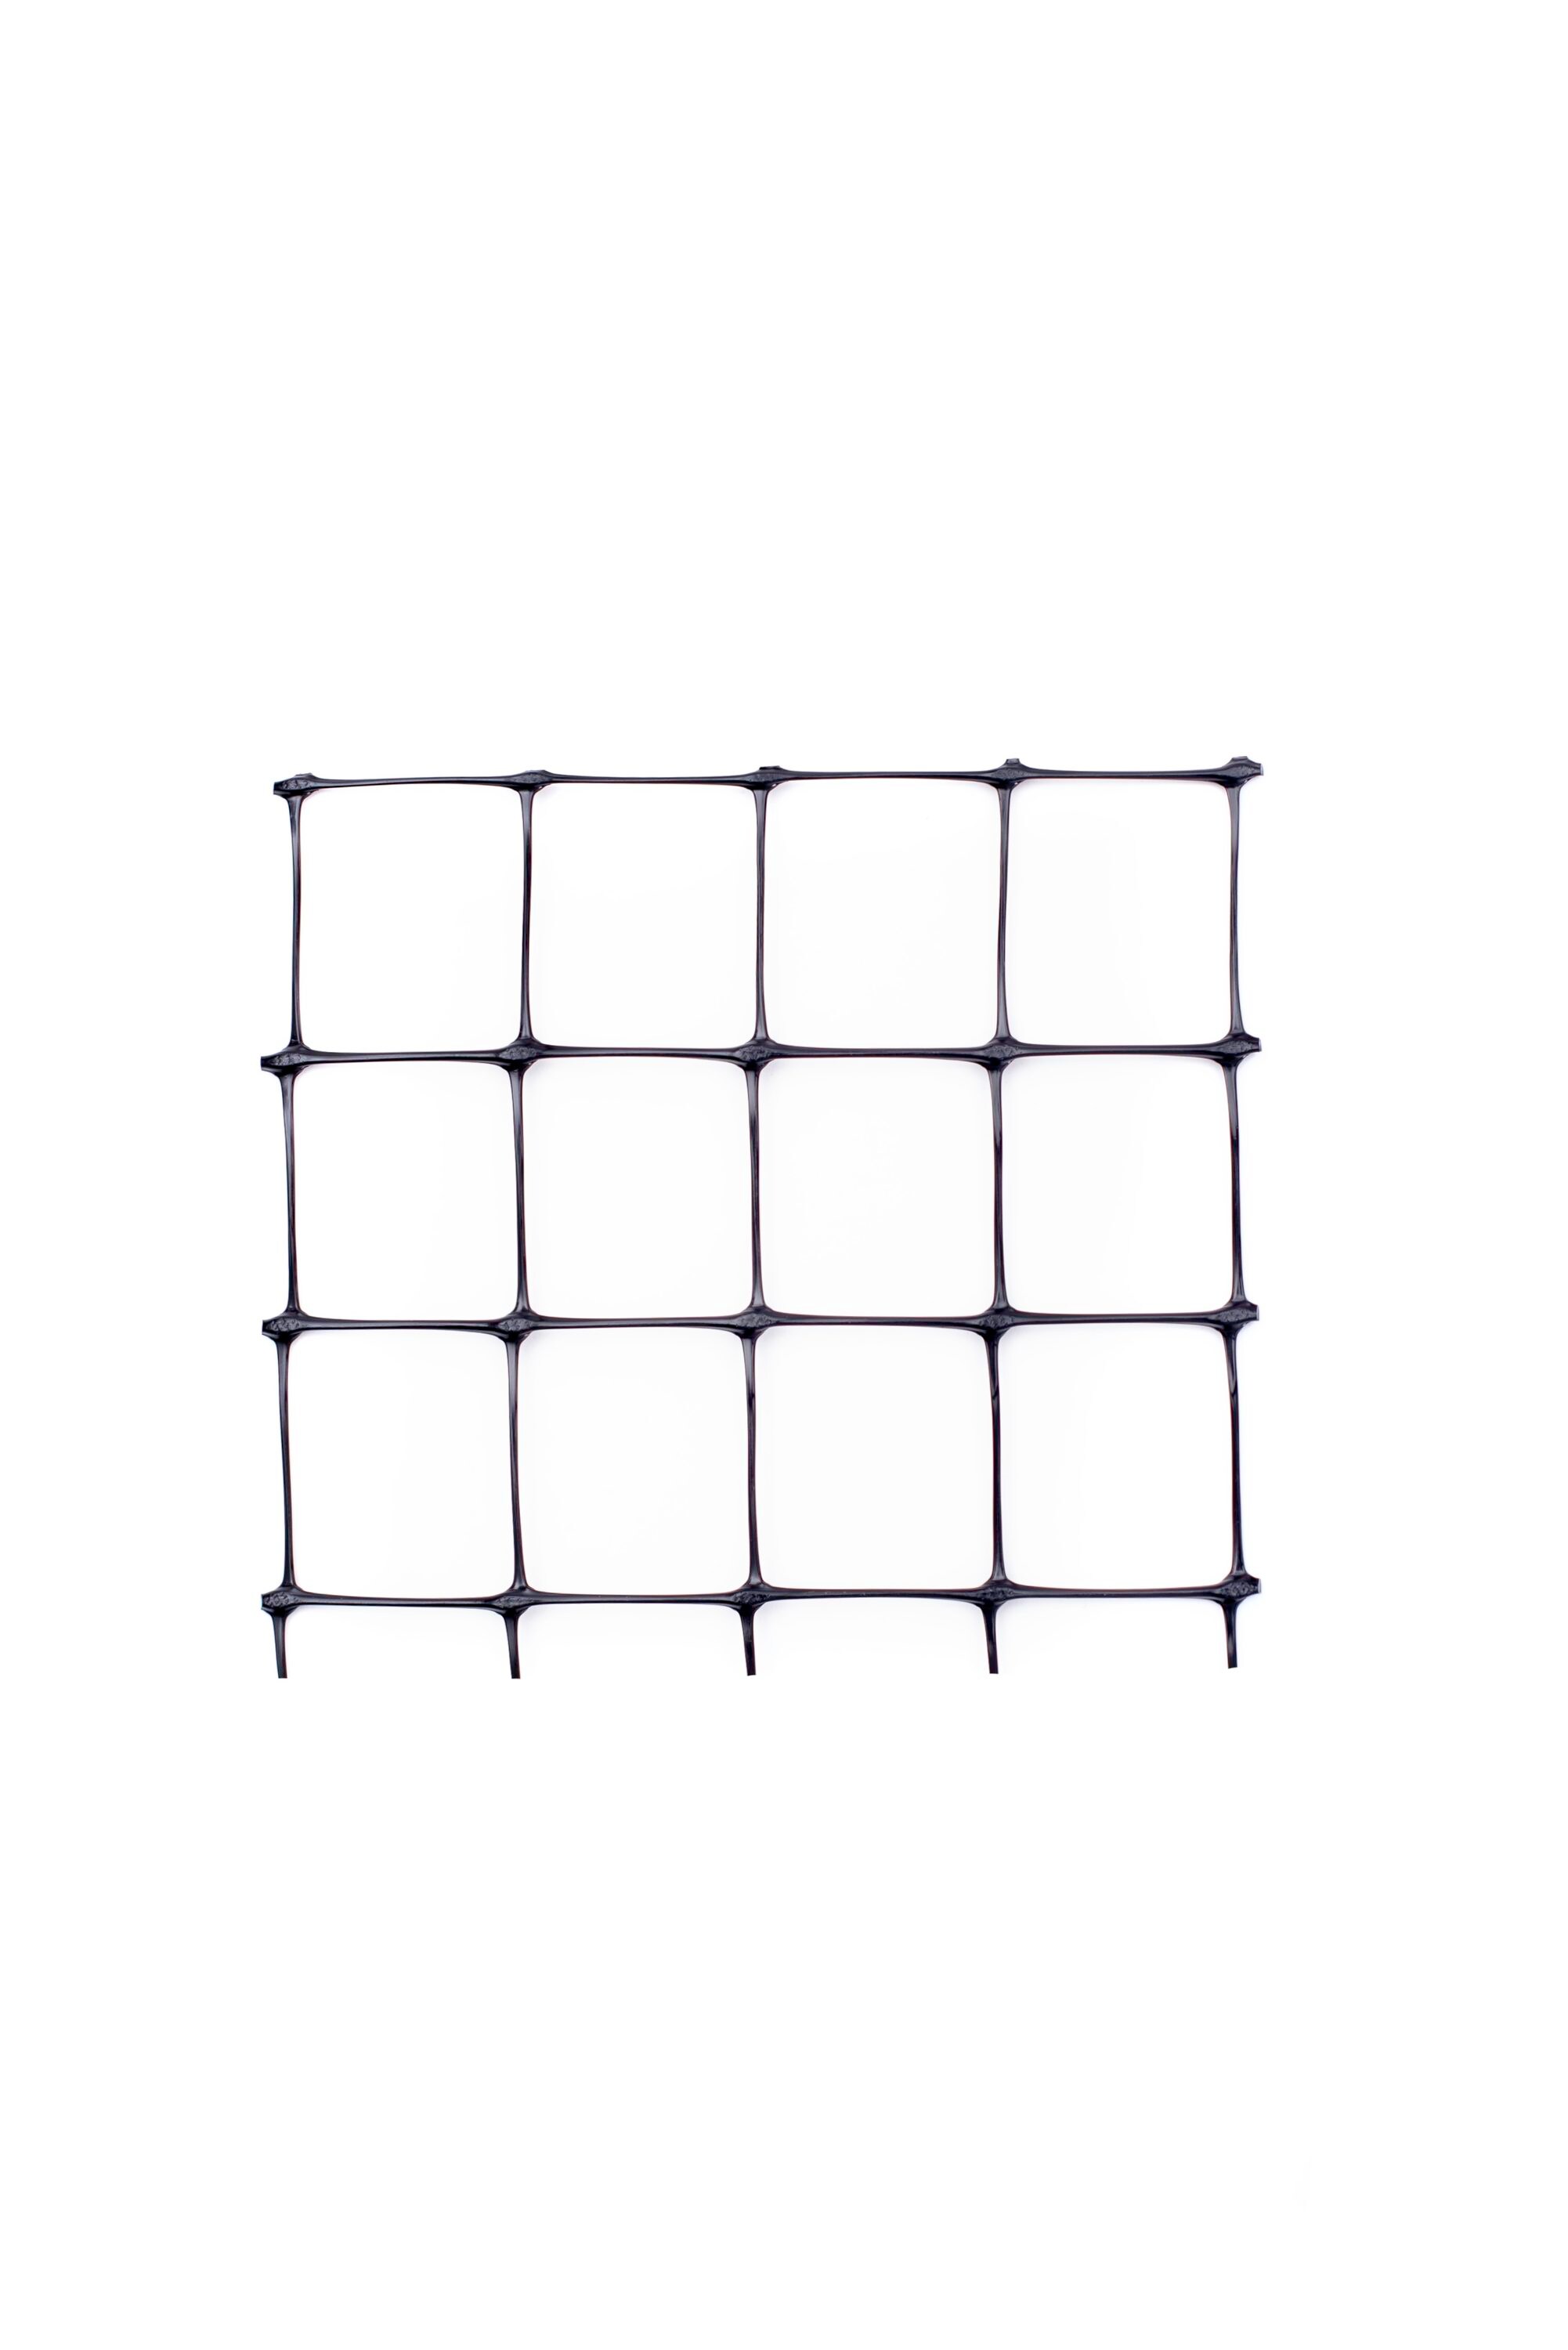 Tenax 330-ft x 7.49-ft Black Plastic Extruded Mesh Rolled Fencing with ...